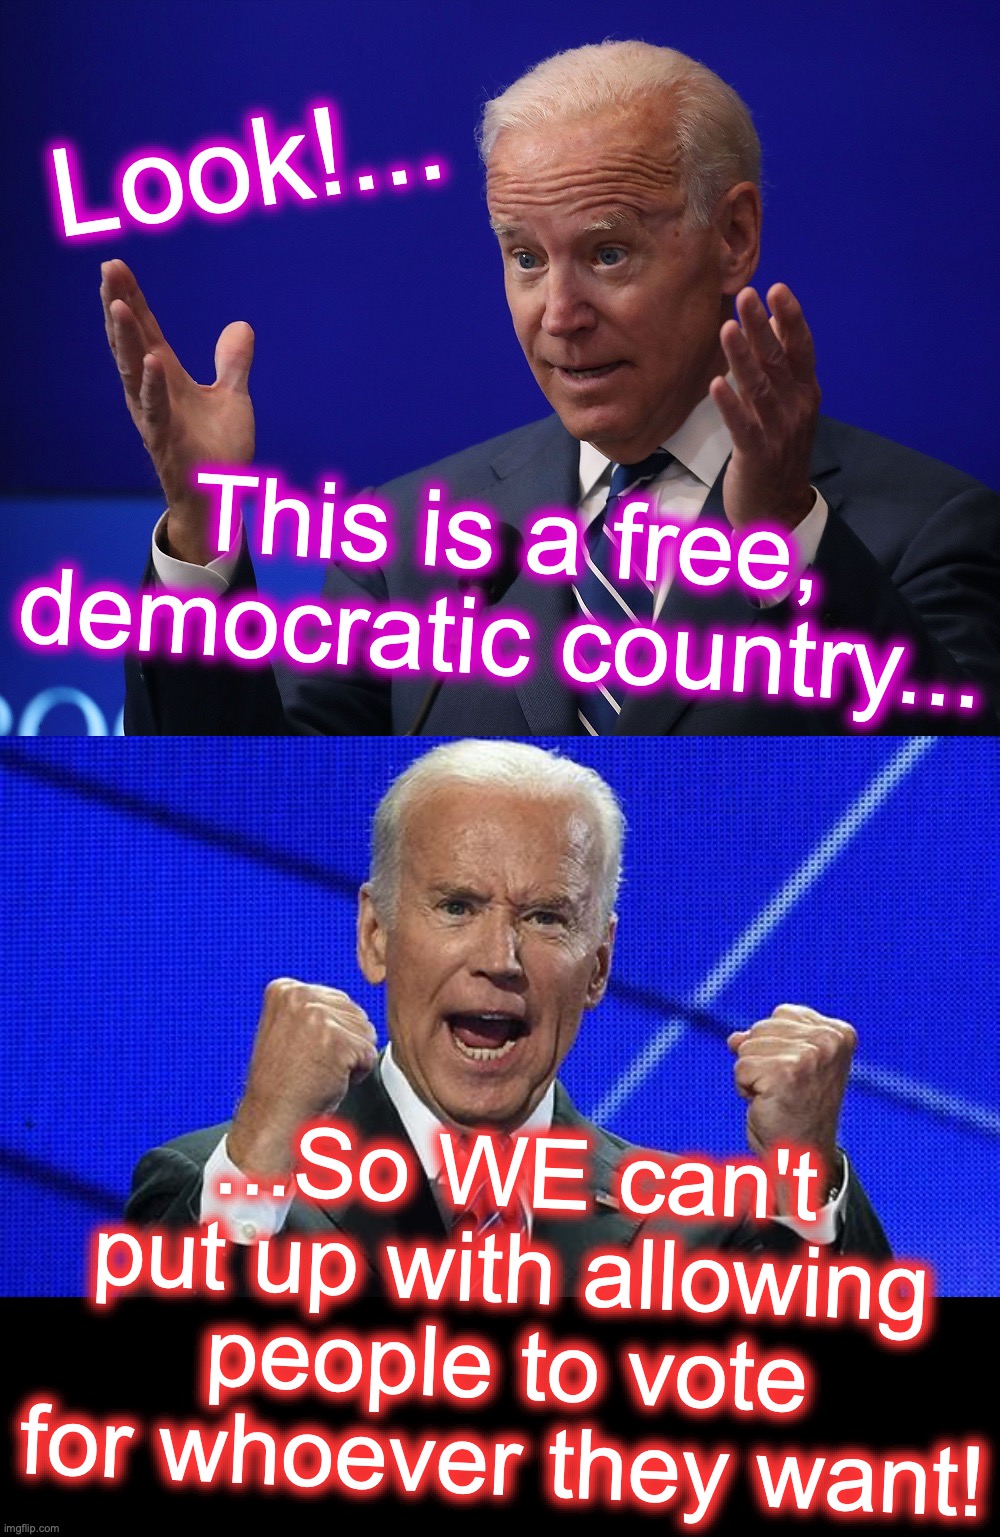 [warning: let-freedom-ring satire] | Look!... This is a free, democratic country... ...So WE can't put up with allowing people to vote for whoever they want! | image tagged in joe biden - hands up,joe biden fists angry,i love democracy,fascism,marxism,funny memes | made w/ Imgflip meme maker